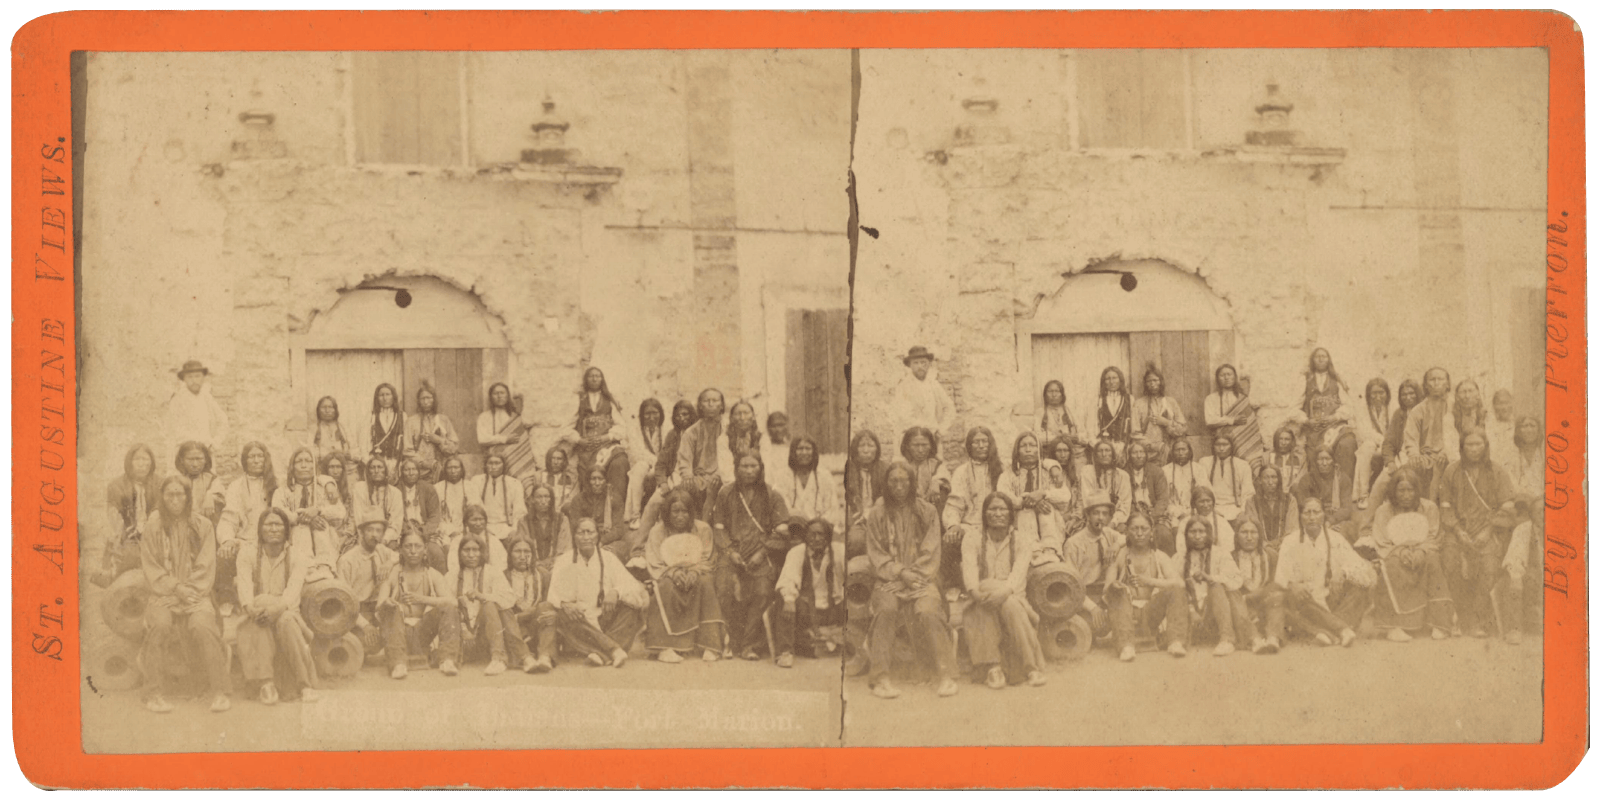 Group portrait of unidentified Native American prisoners of war (likely Kiowa, Southern Cheyenne, Southern Arapaho and/or Caddo Indians) involved in the Red River War being held at Fort Marion in Saint Augustine, Florida. An unidentified white American man appears at left.